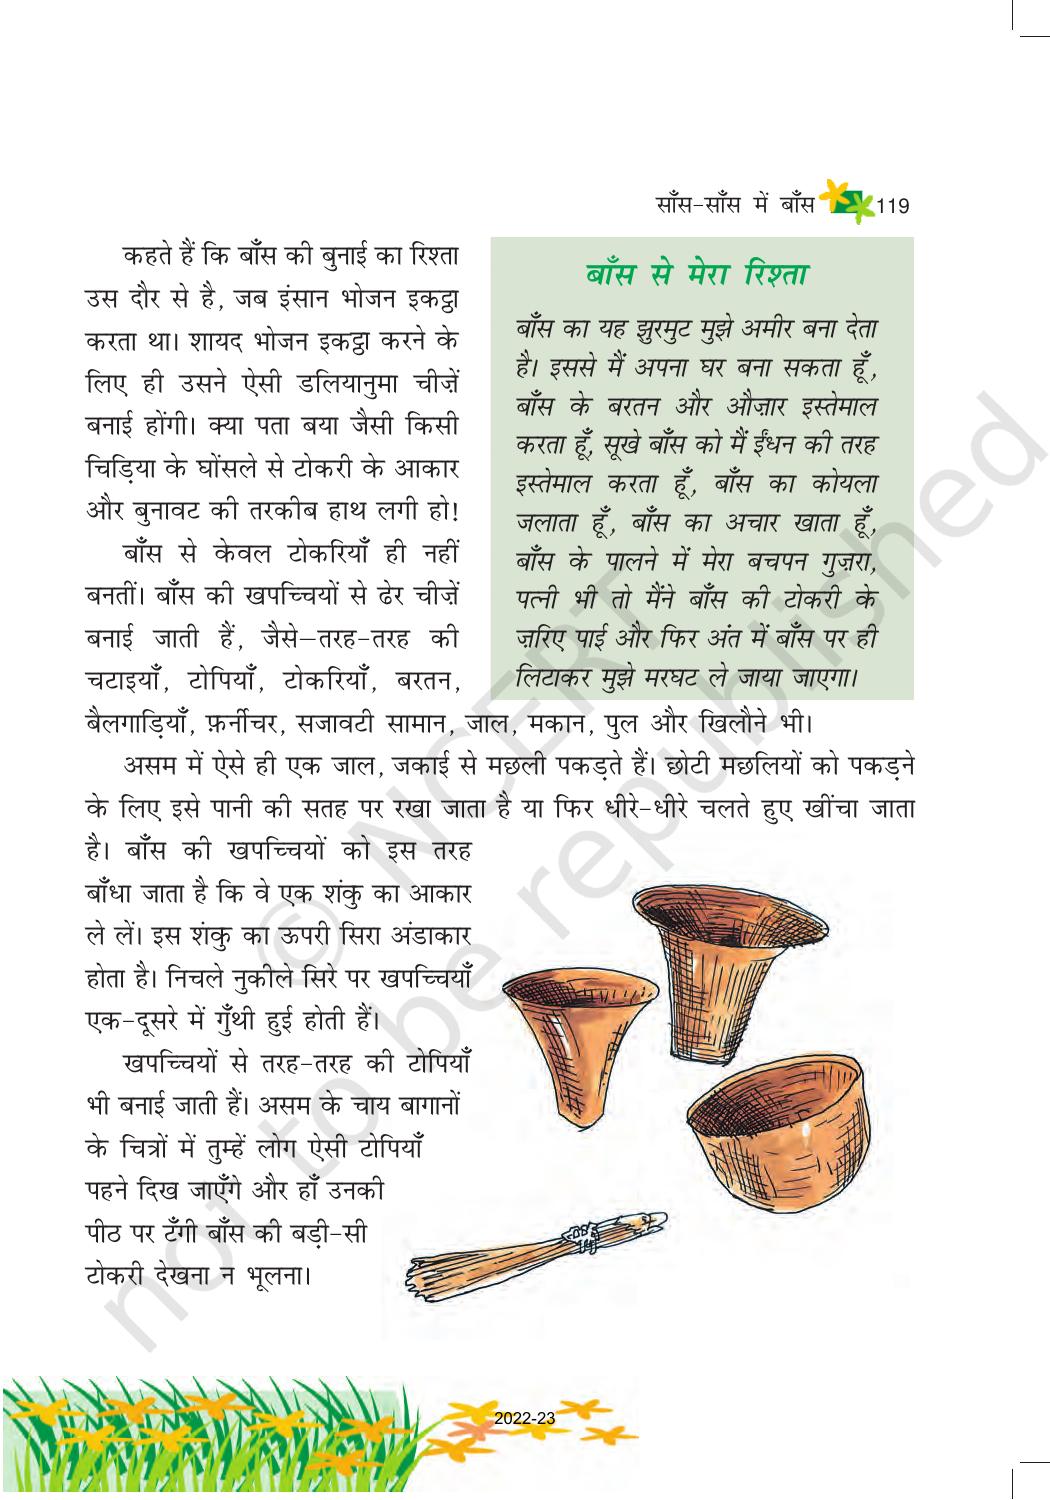 NCERT Book for Class 6 Hindi(Vasant Bhag 1) : Chapter 17-साँस – साँस में बांस - Page 2